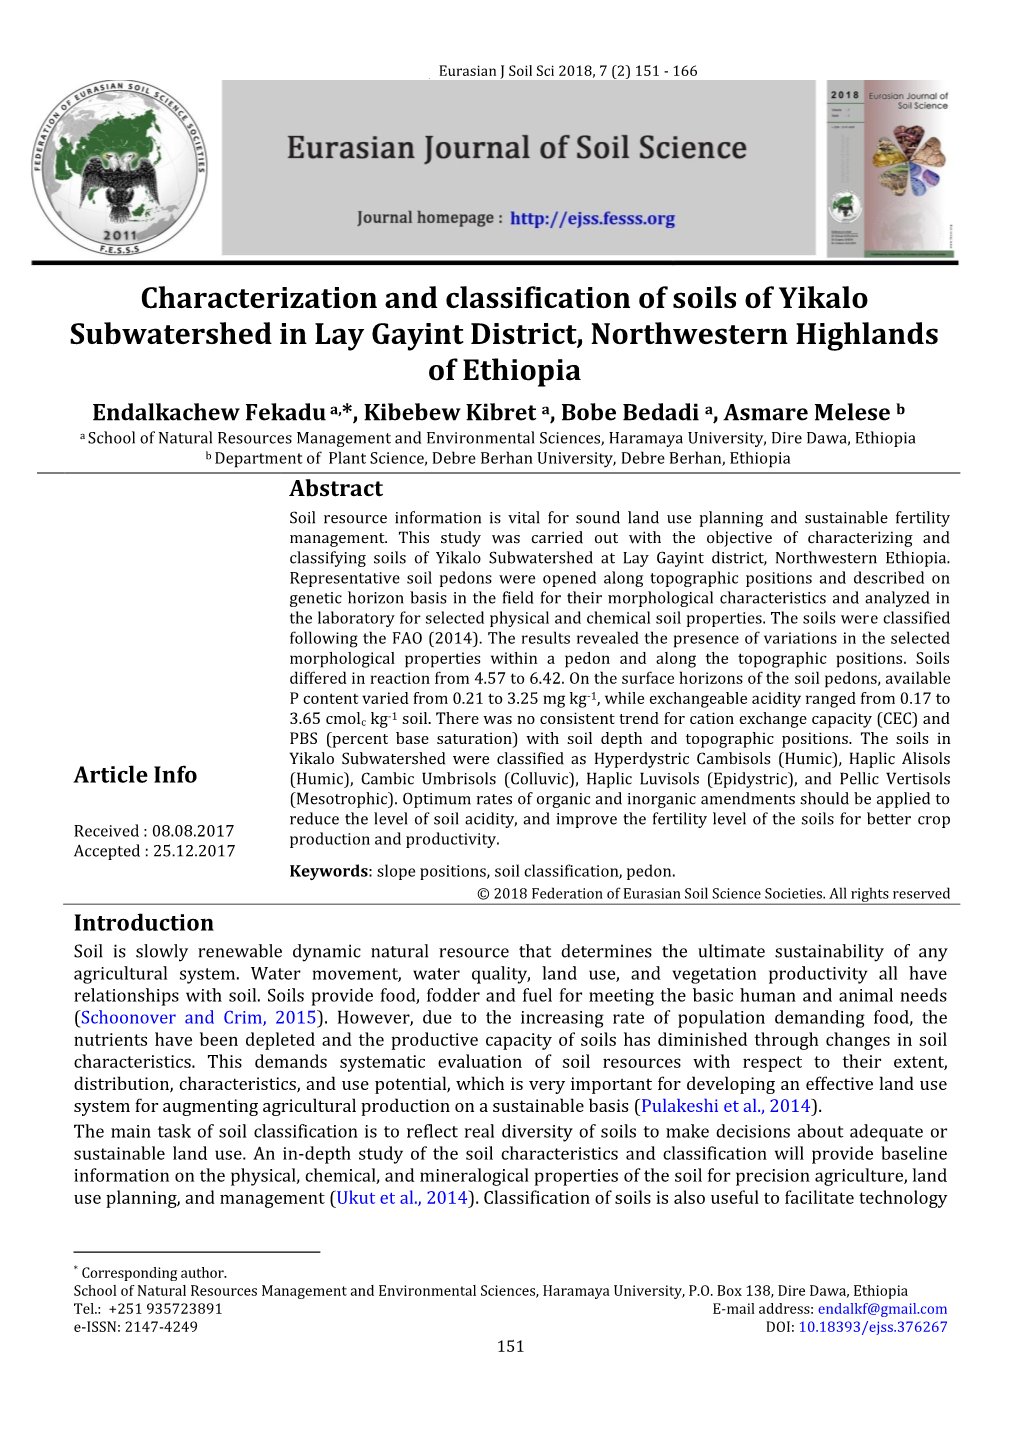 Characterization and Classification of Soils of Yikalo Subwatershed in Lay